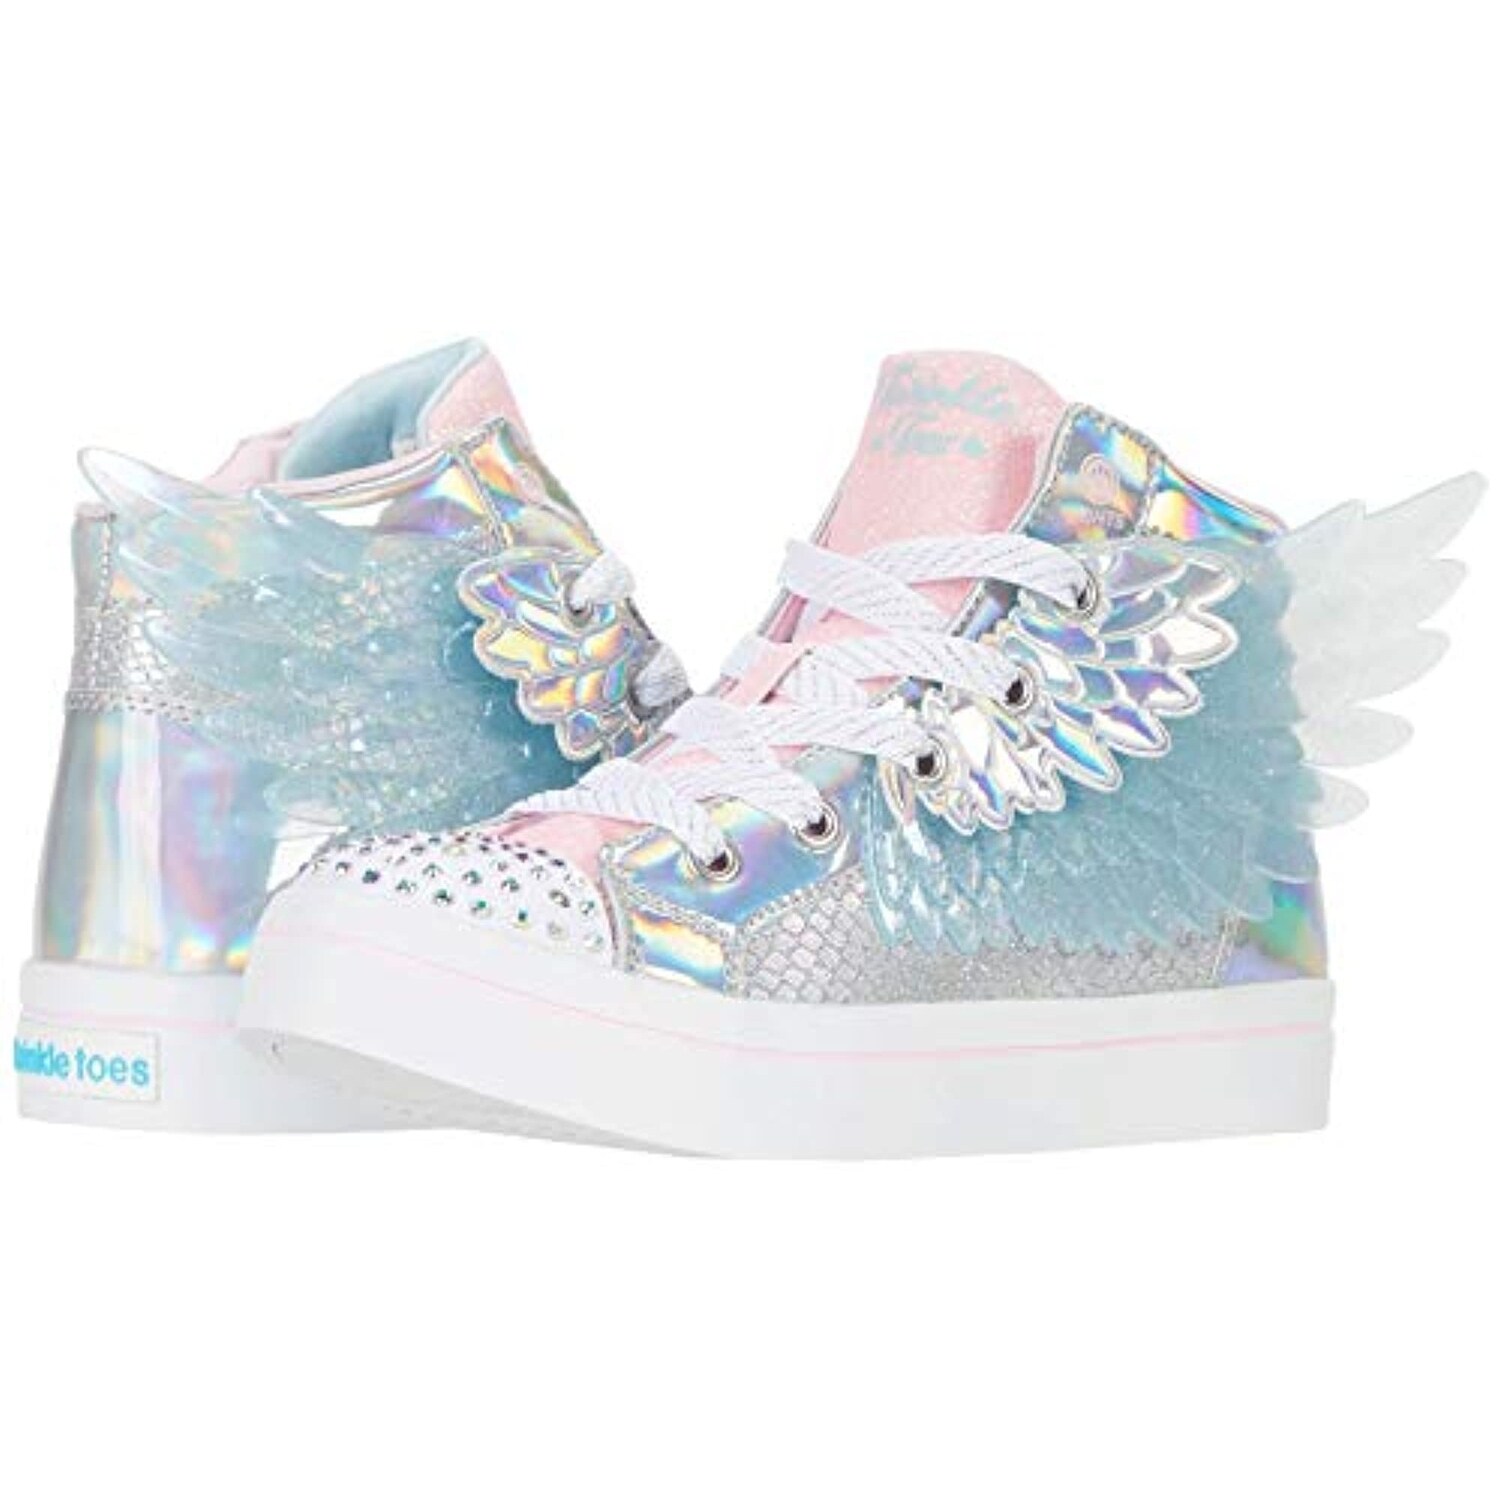 skechers with wings